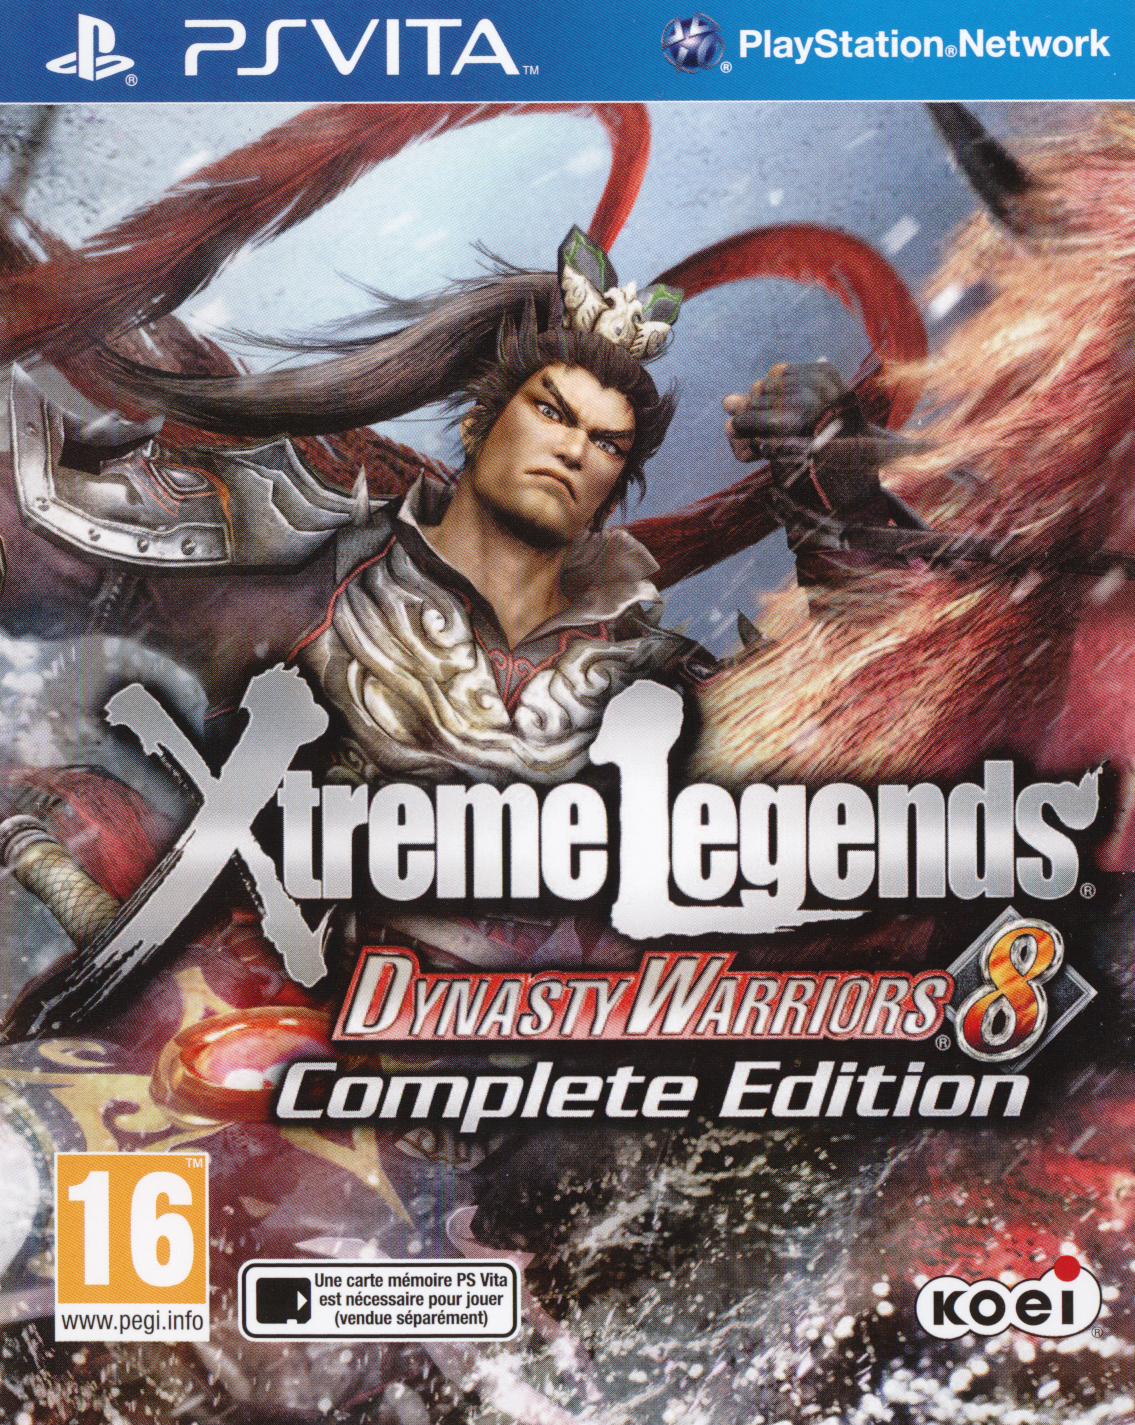 dynasty-warriors-8-xtreme-legends-complete-edition-playstation-vita